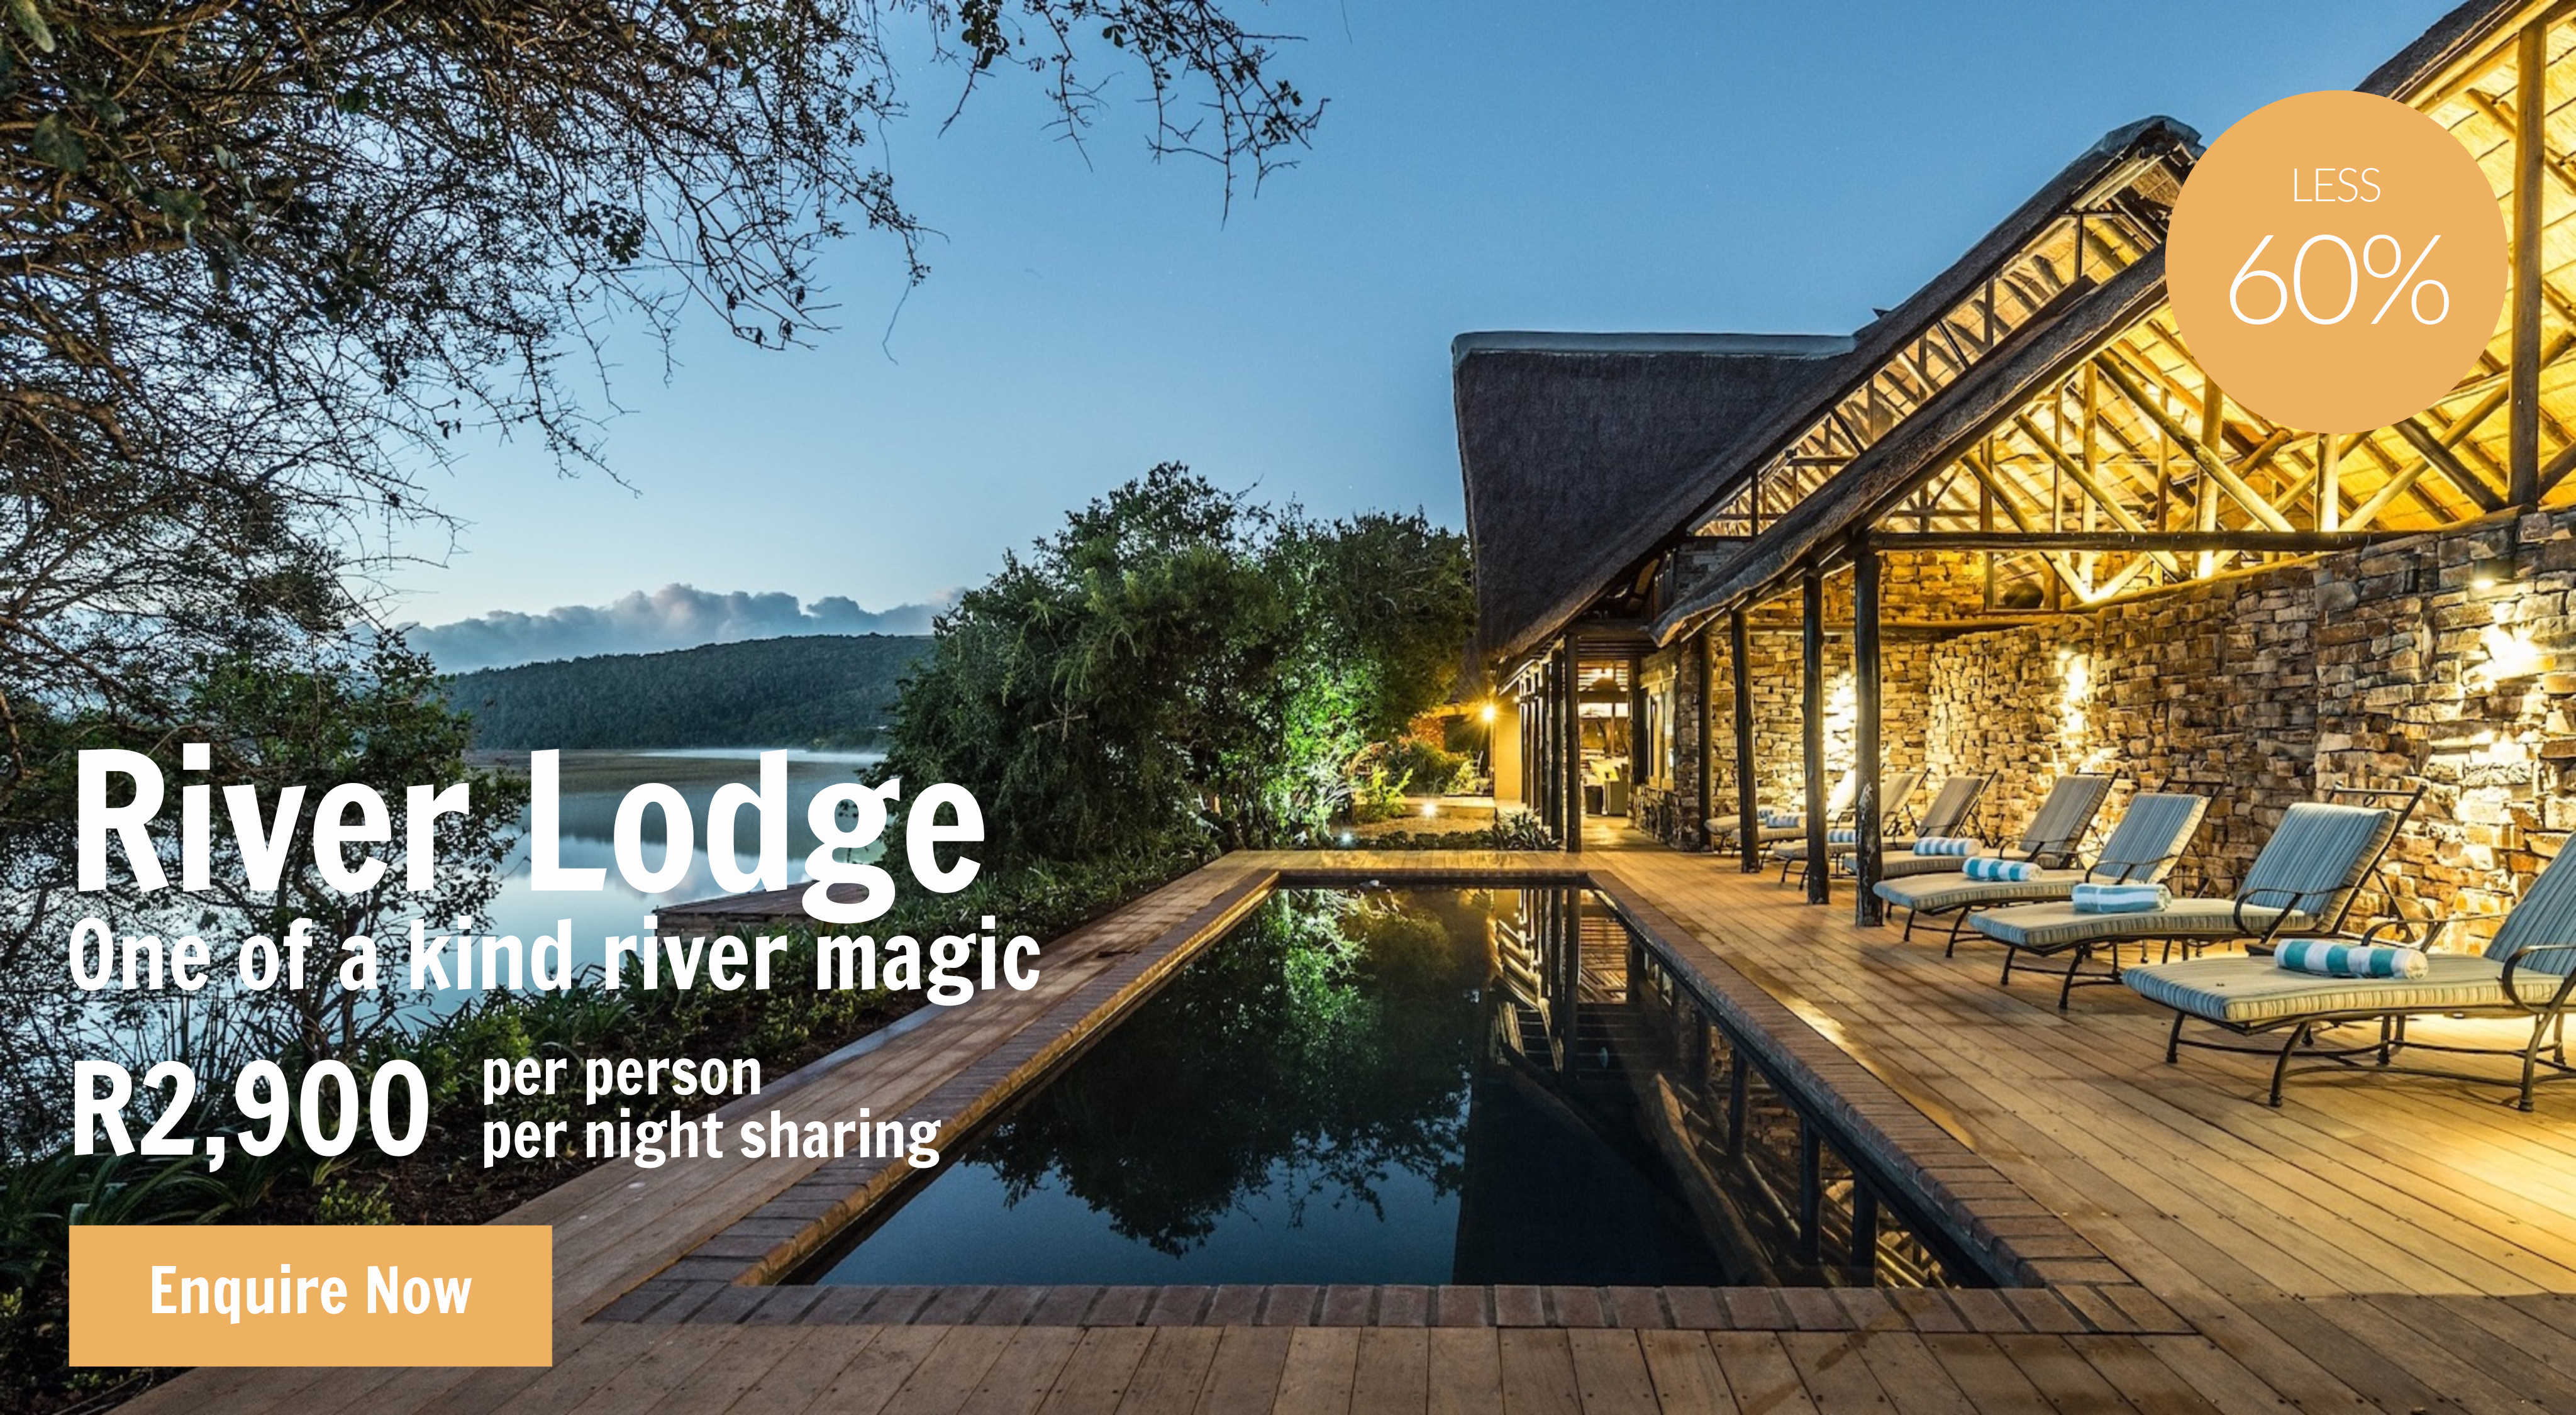 River Lodge Safari Special for South Africans